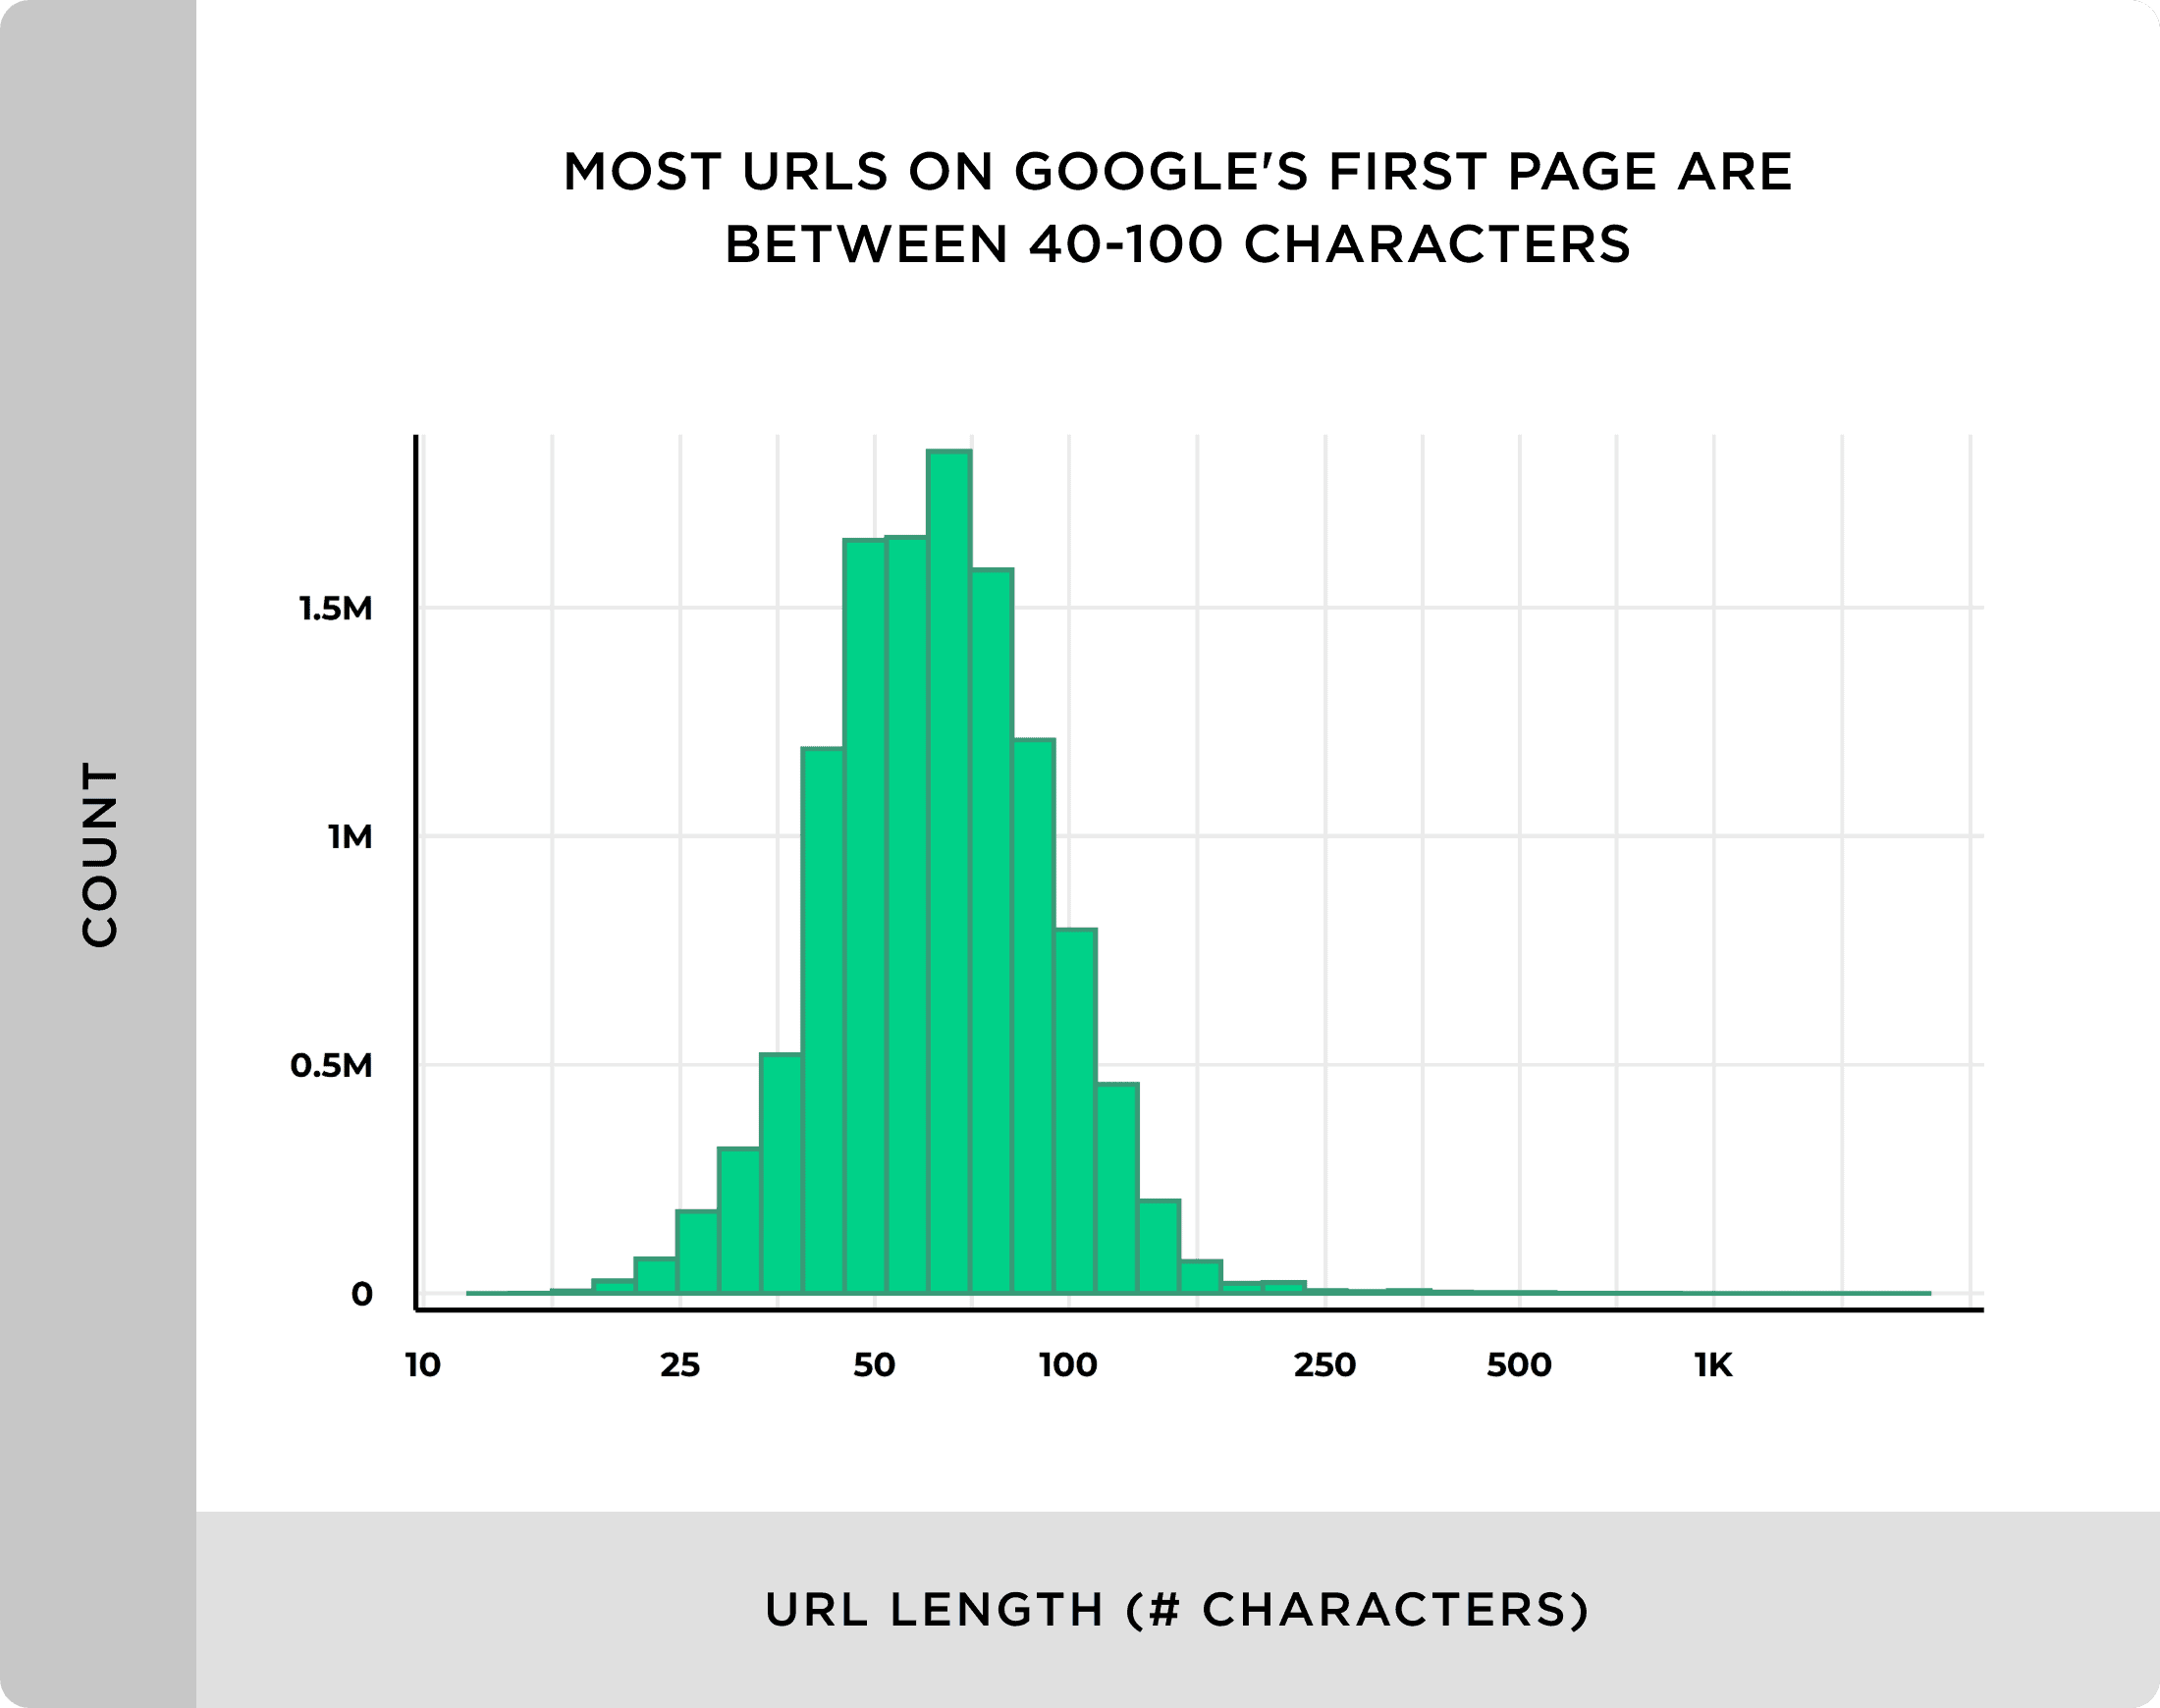 Most URLs on Google's first page are between 40-100 characters